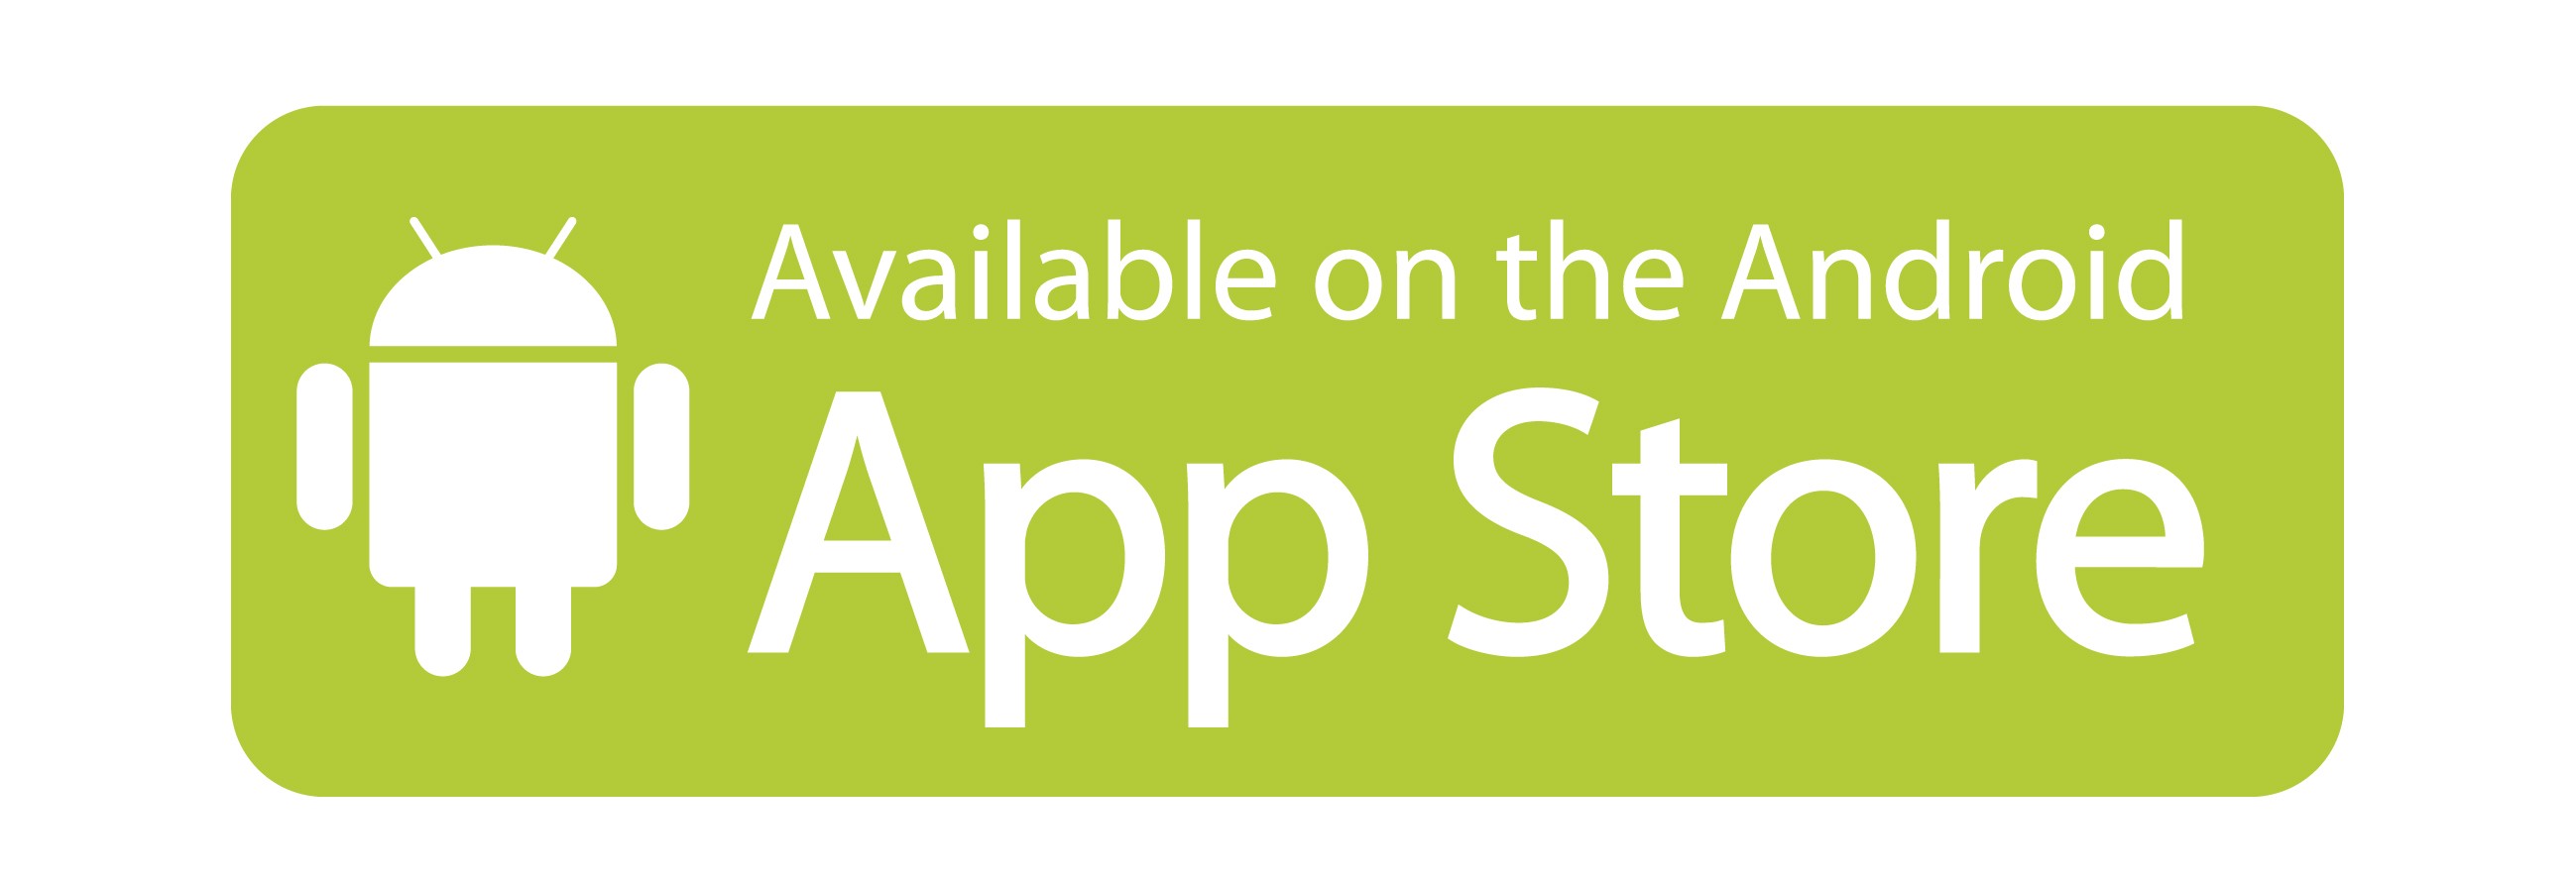 Apple Store App Download On Android